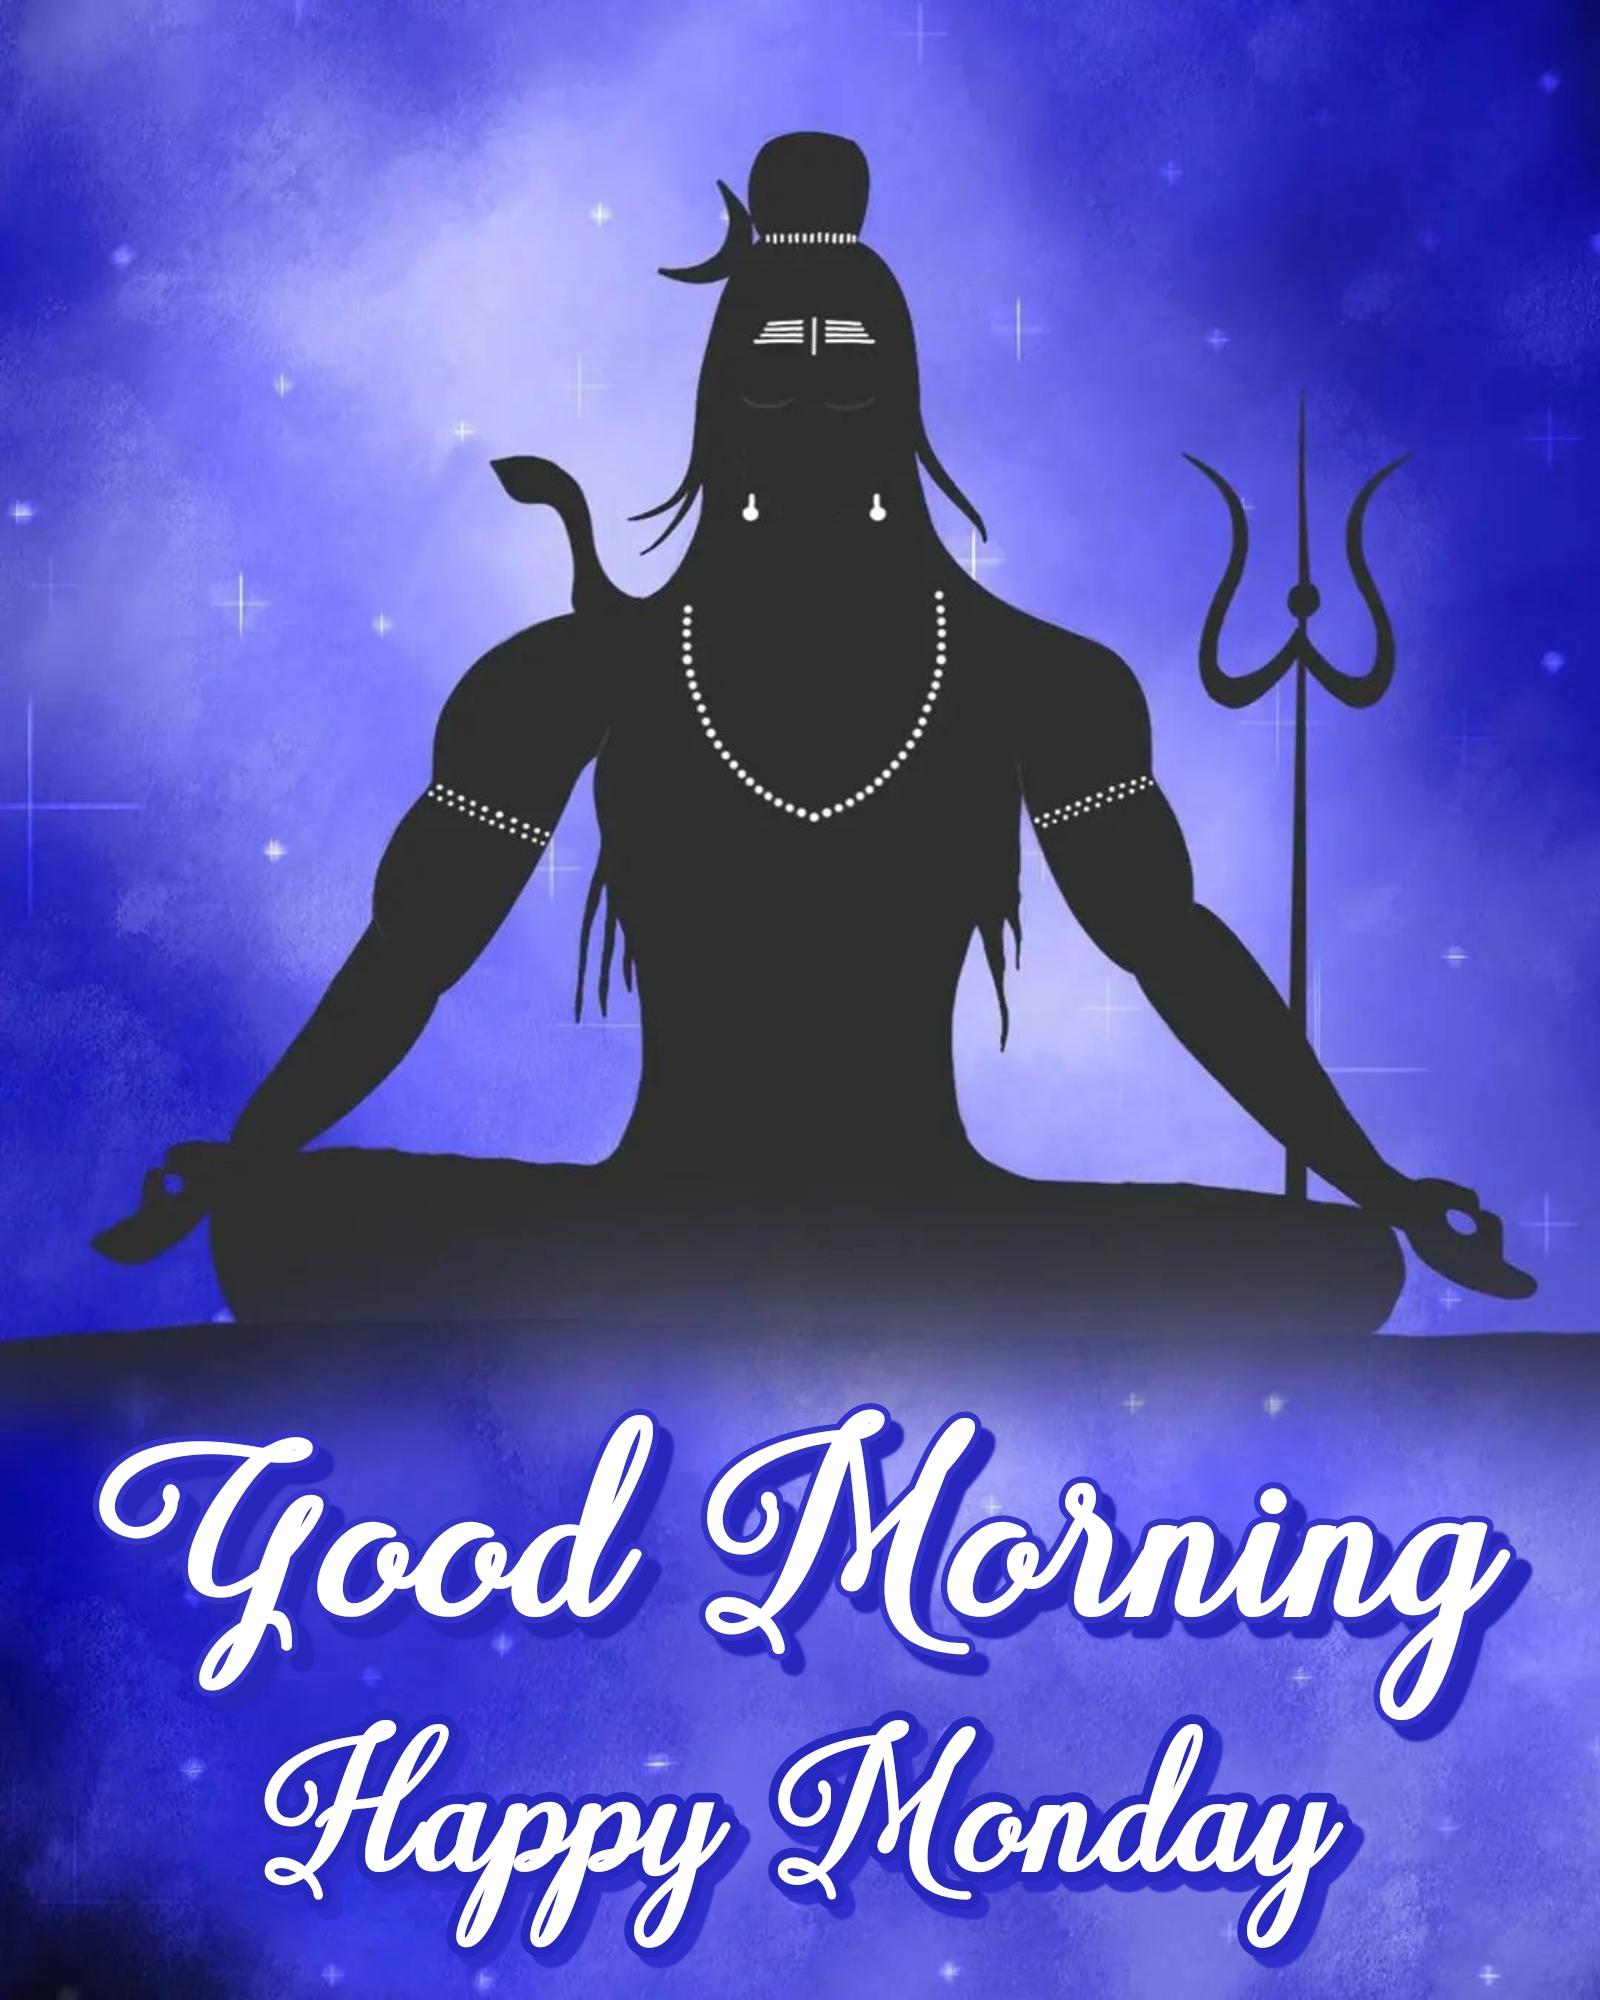 Good Morning Lord Shiva Images